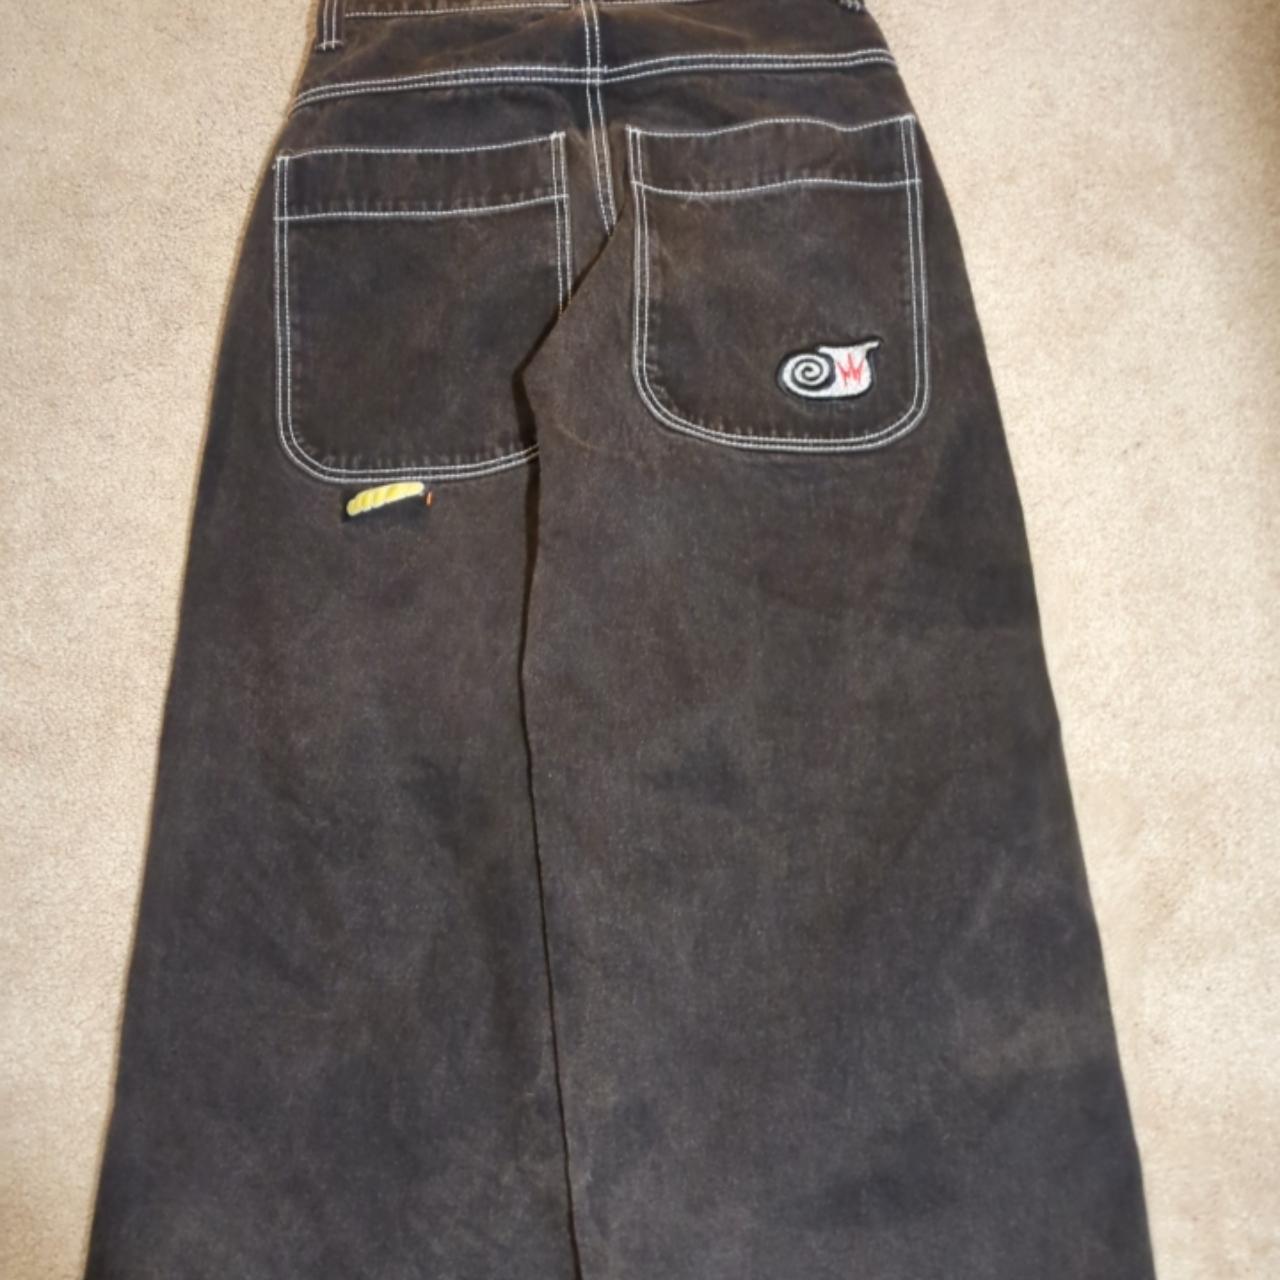 Faded black jnco jeans twin cannon 101 28